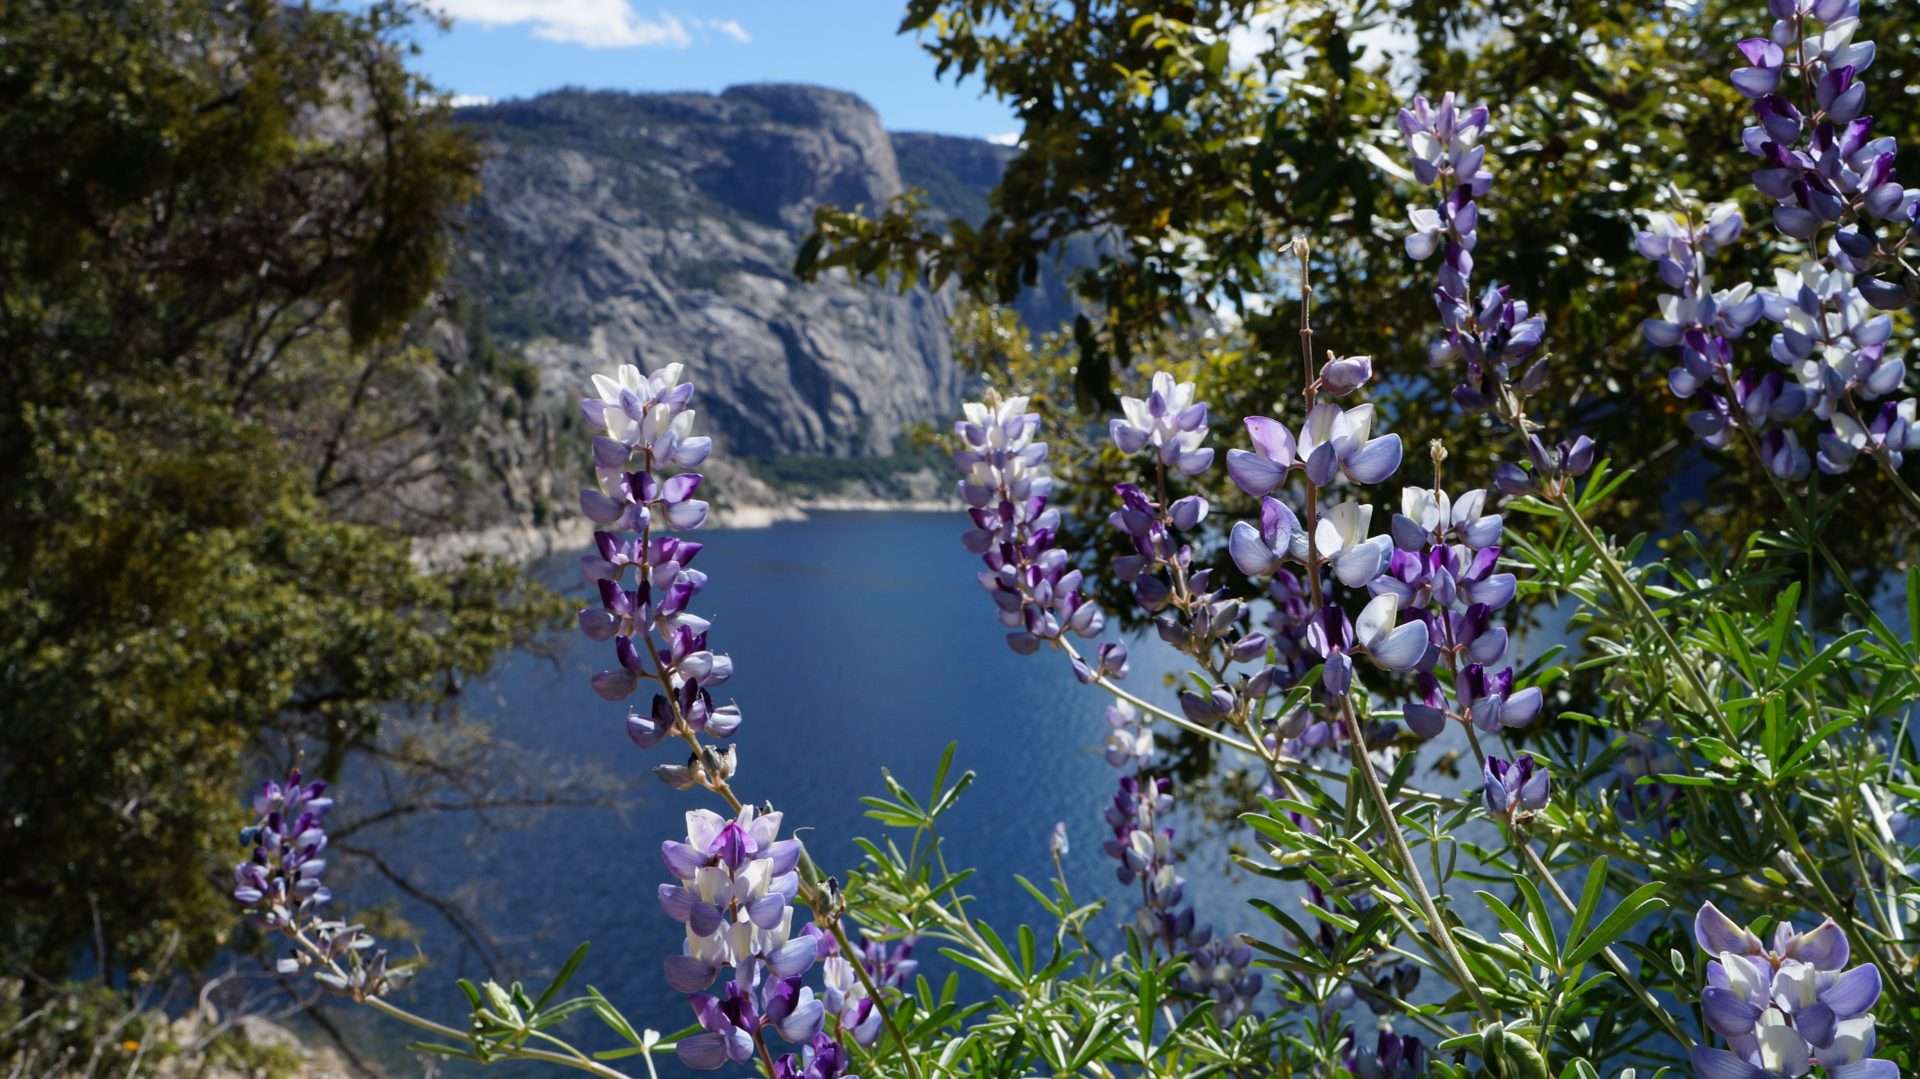 Flowers blooming around view looking out over lake in Yosemite National Park in the spring.